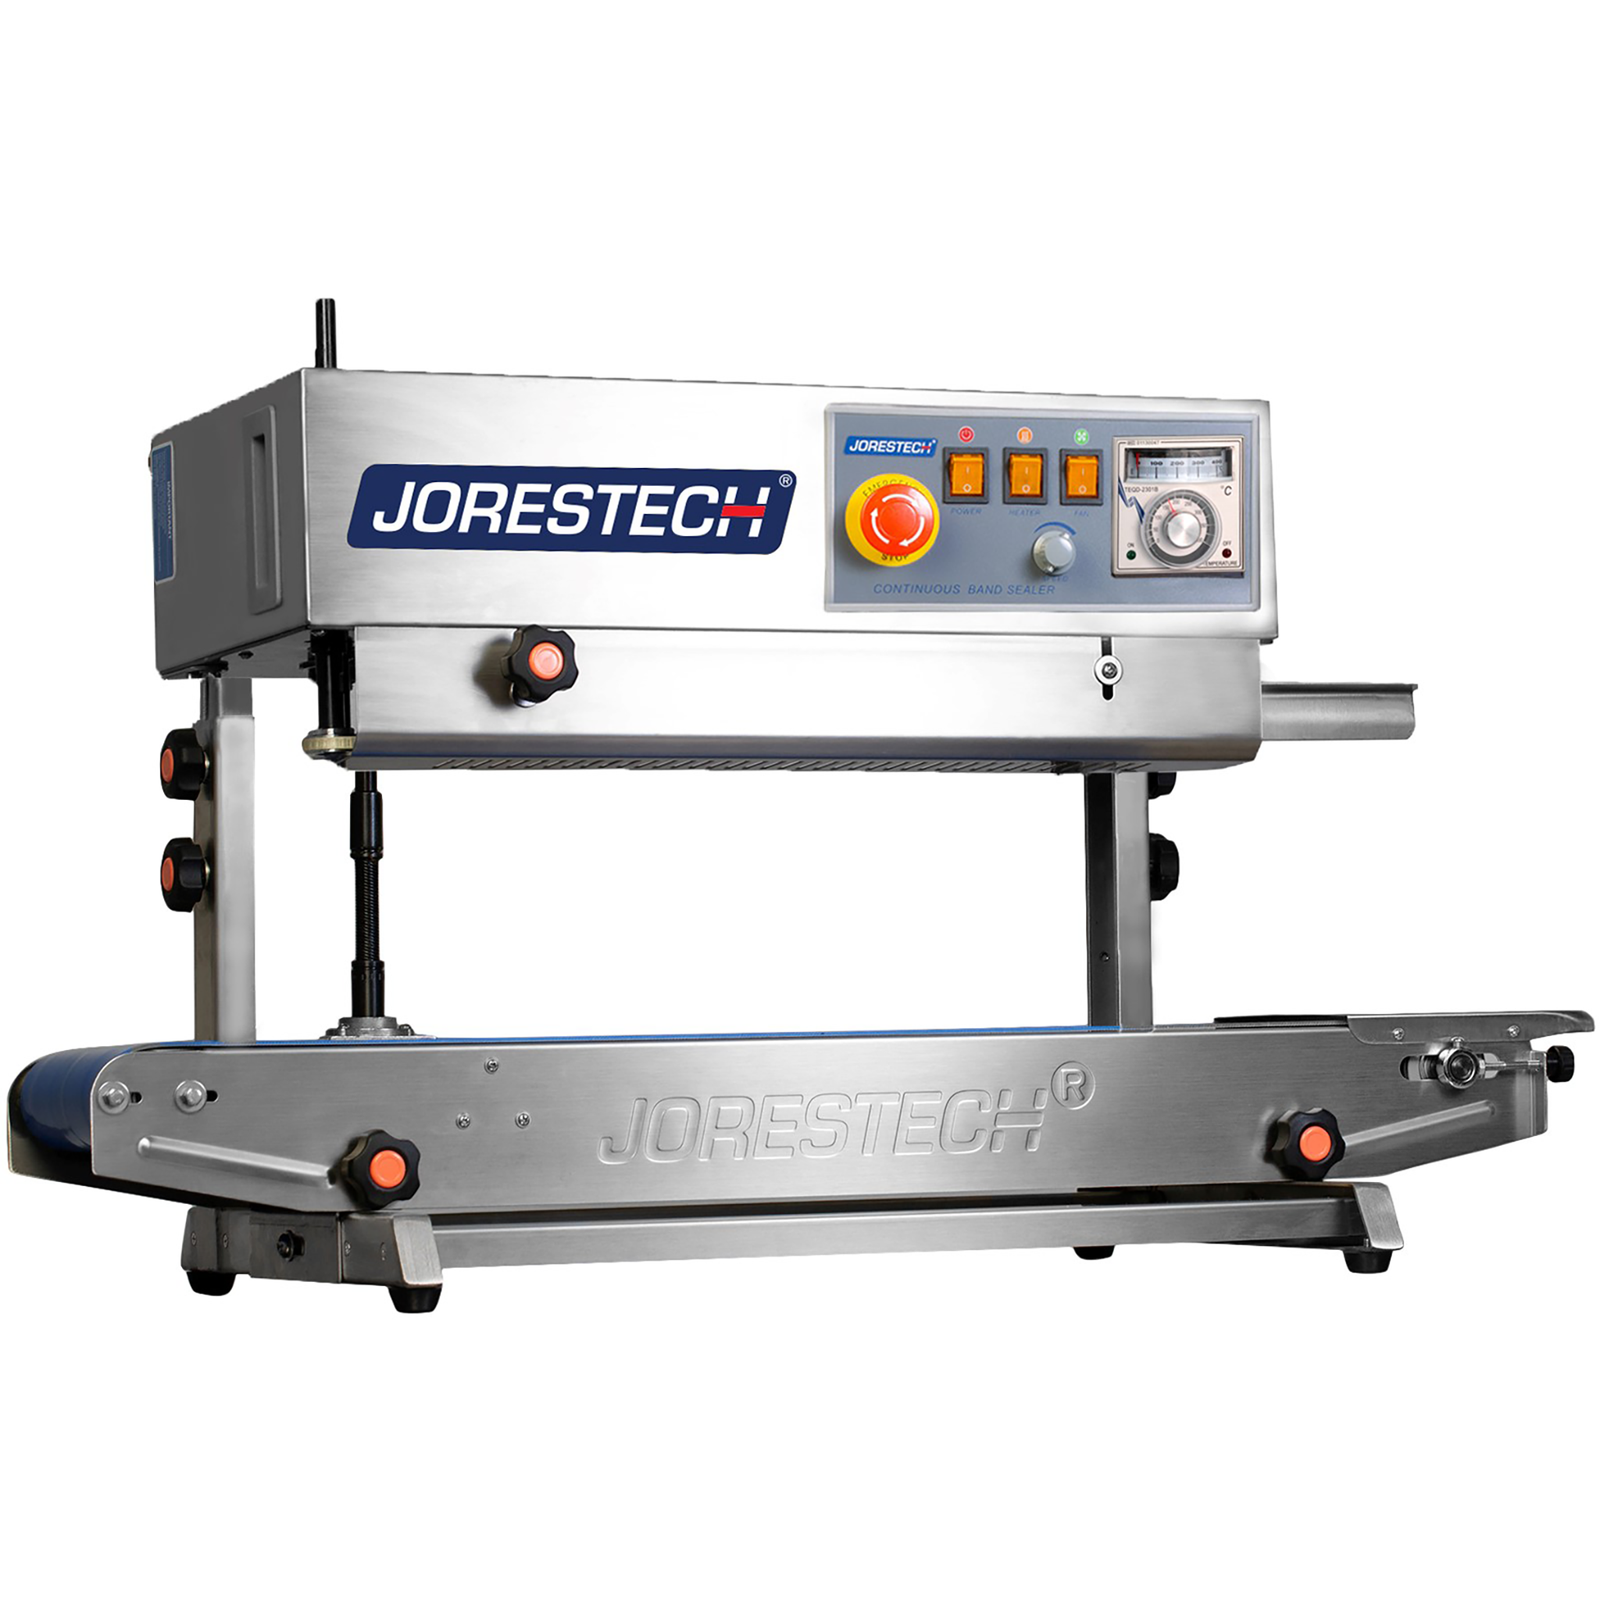 Stainless steel continuous band sealer for horizontal and vertical applications